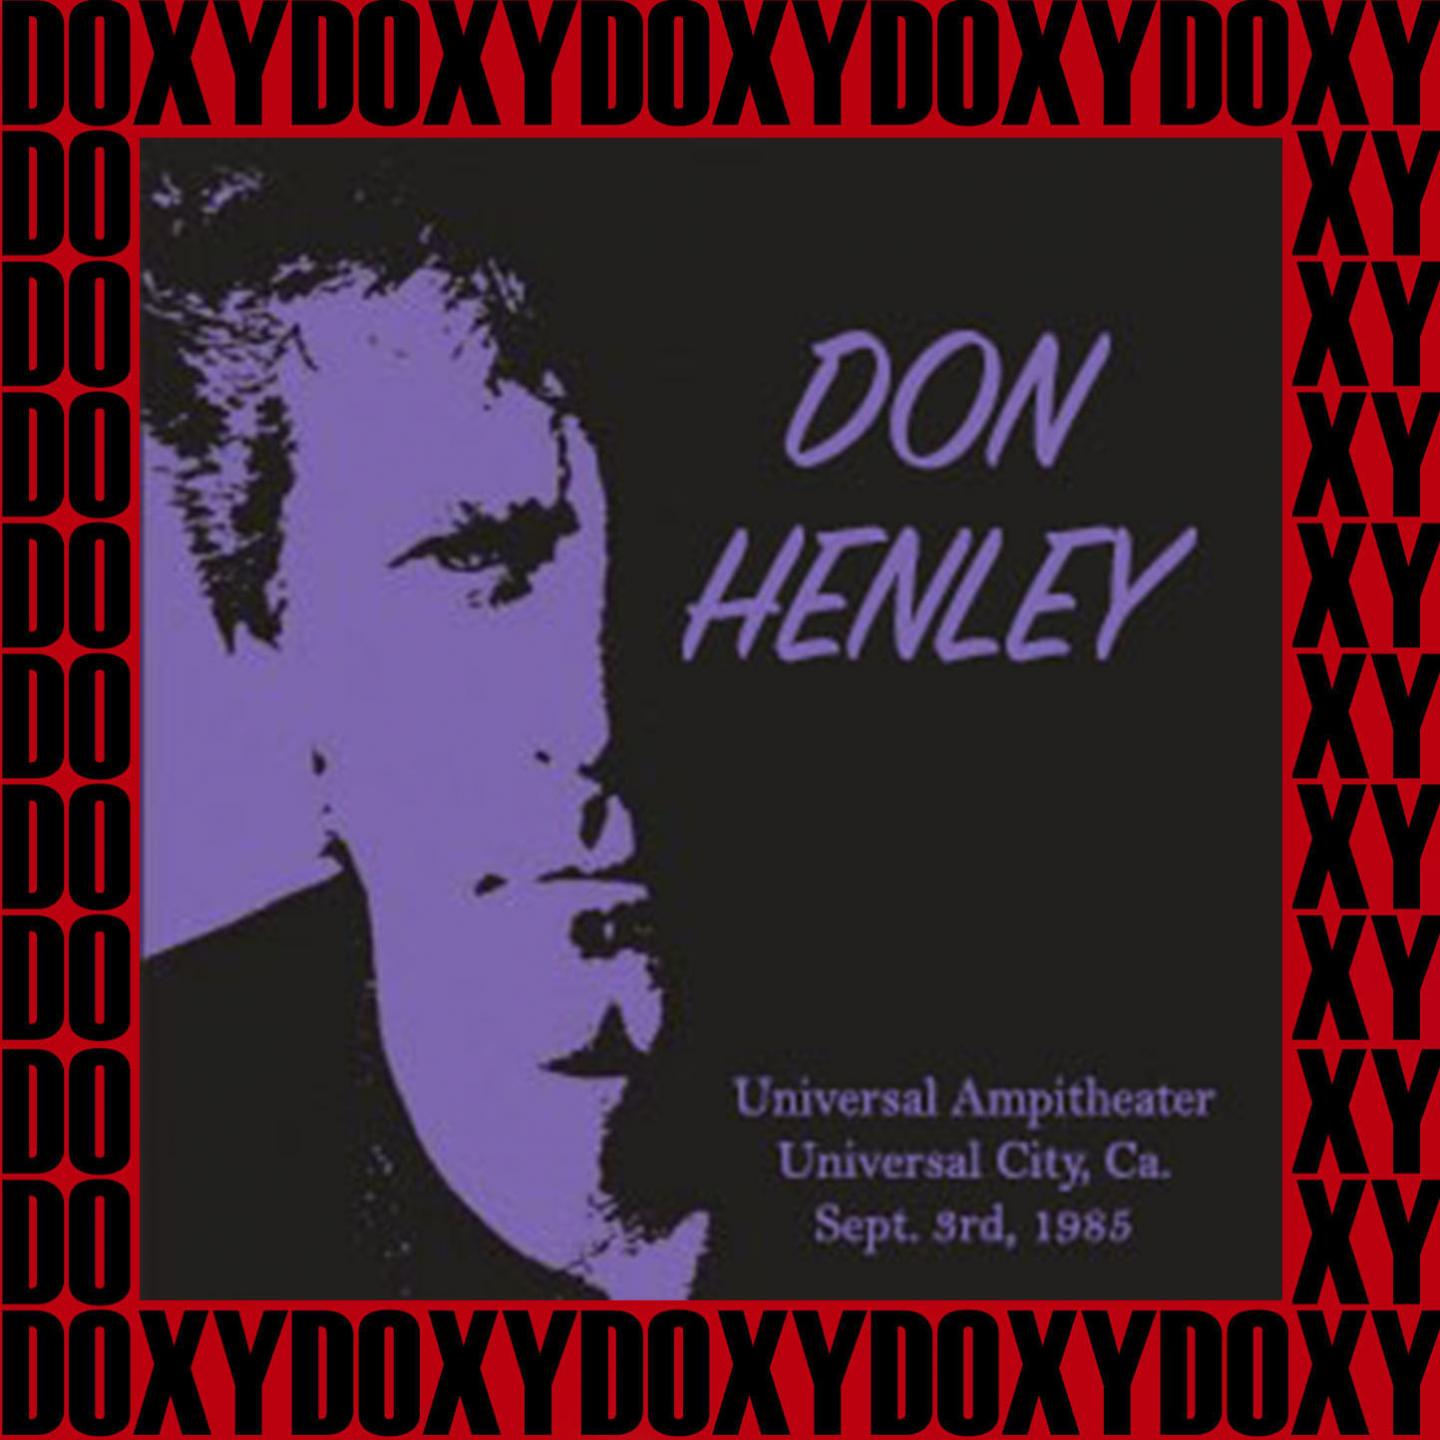 Universal Ampitheater, Universal City, Ca. Sept. 3rd, 1985 (Doxy Collection, Remastered, Live on Fm 专辑